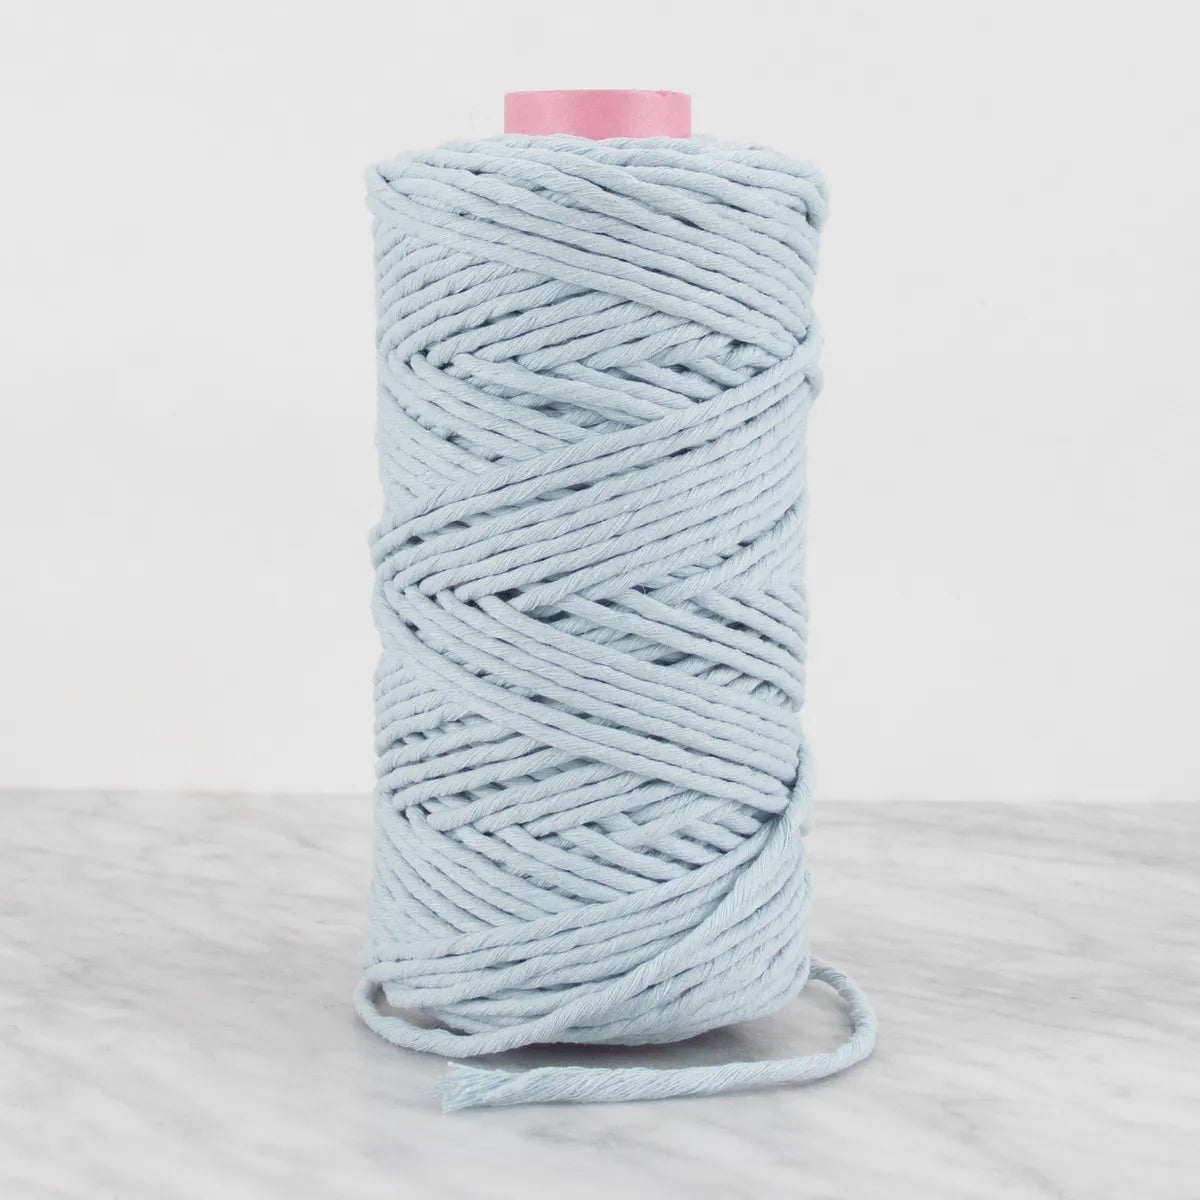 5 mm Recycled Cotton String 0.5 kg - Sky